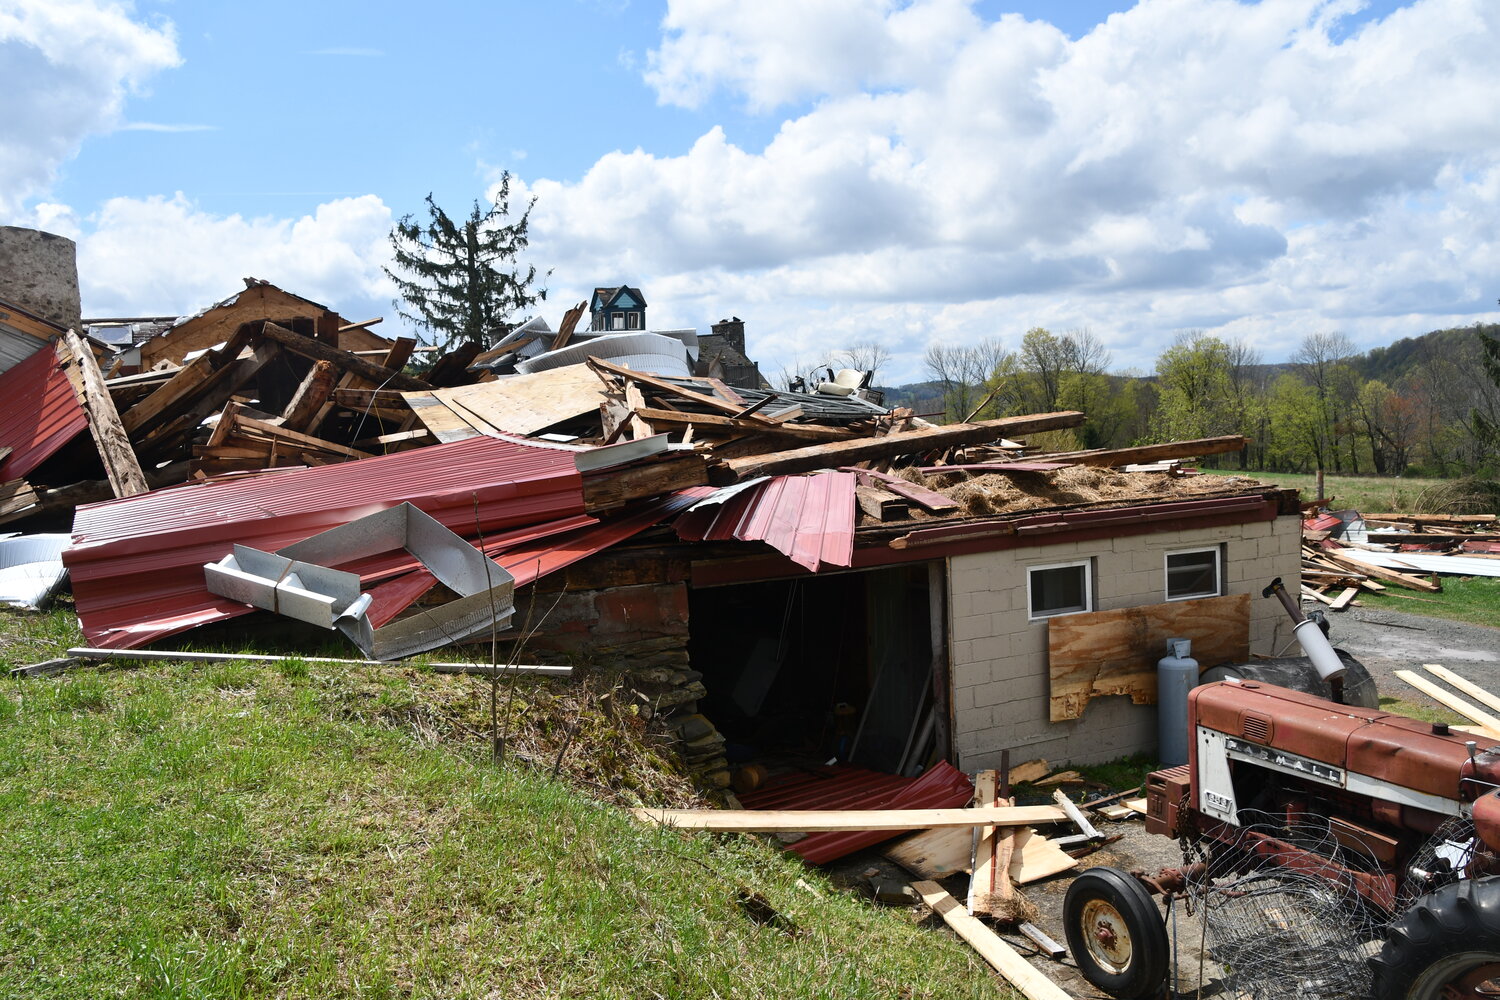 This was the scene at Norris and Catherine Chumley’s property following the April 22 tornado.